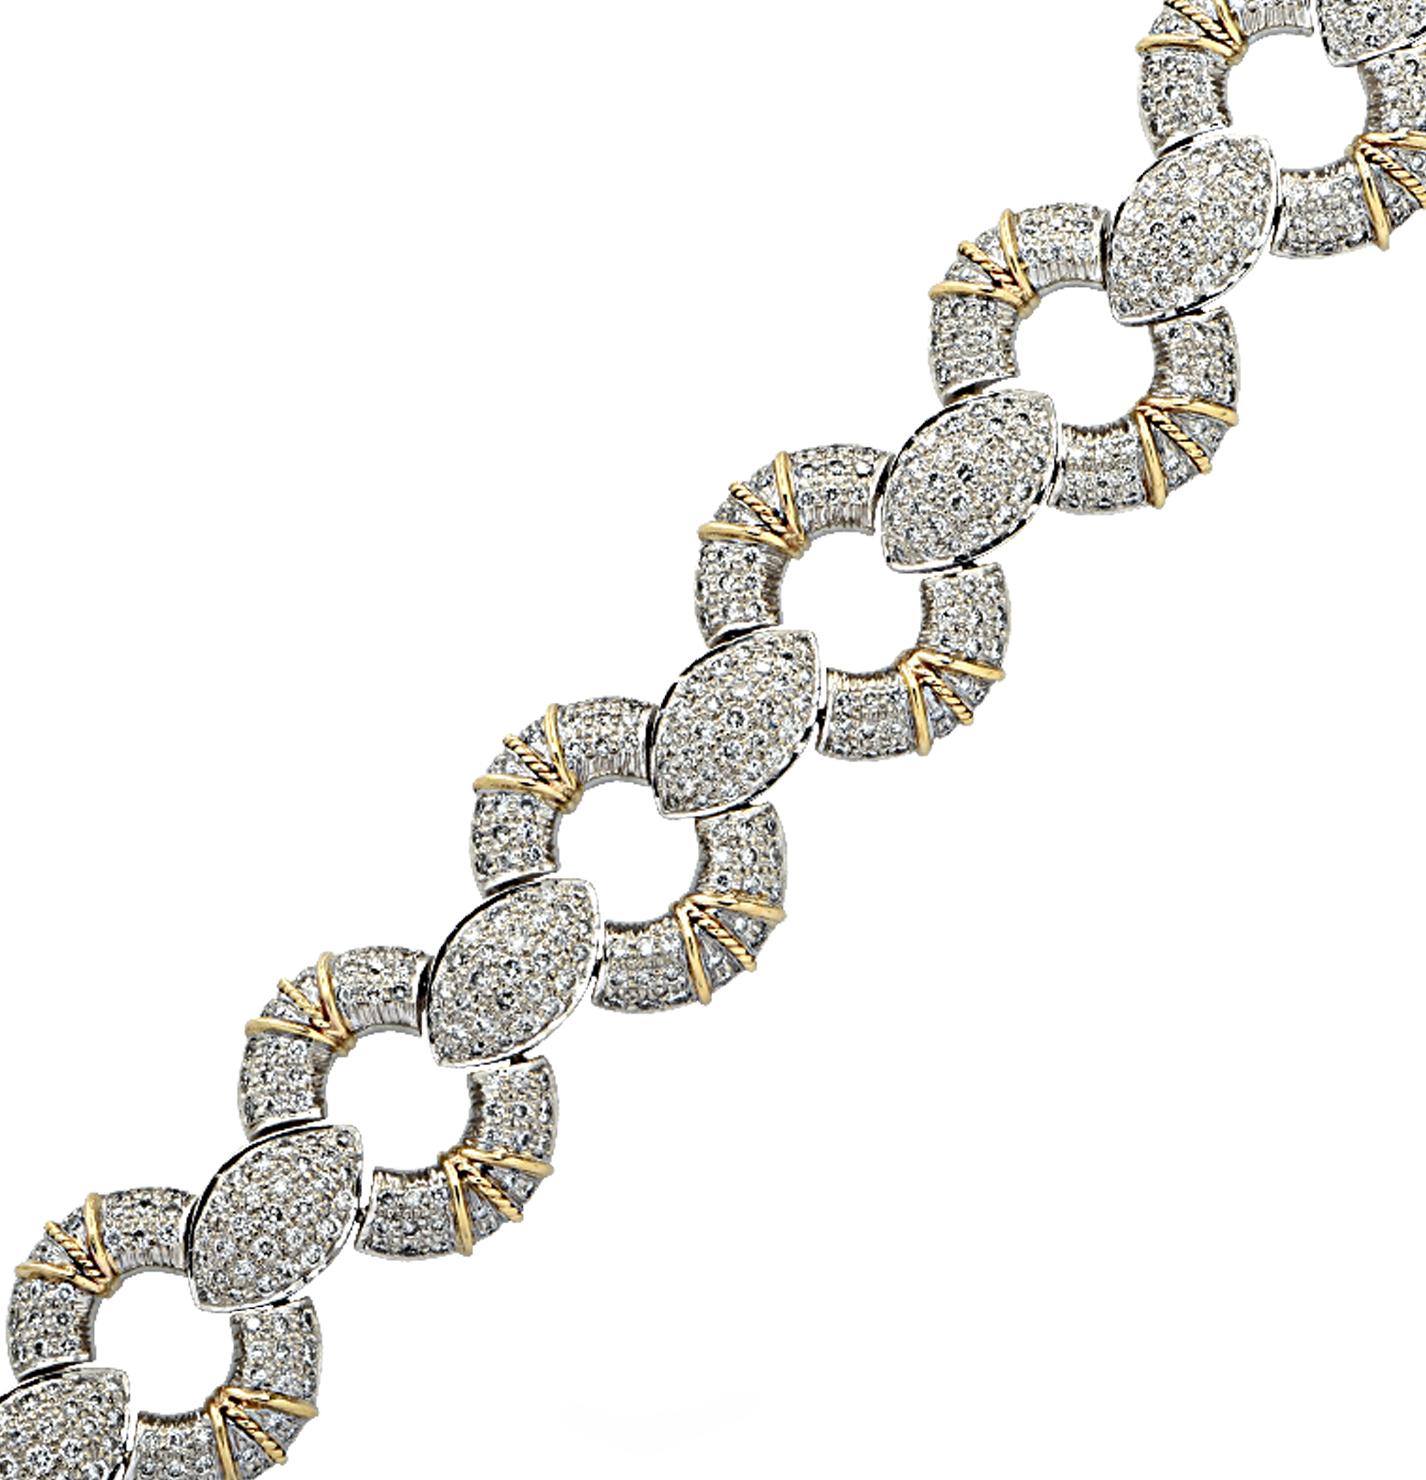 Gorgeous bracelet crafted in white and yellow gold featuring 650 round brilliant cut diamonds weighing approximately 6.5 carats total, G color, VS clarity. Open circle links, pave set with diamonds and adorned with yellow gold finishes, alternate